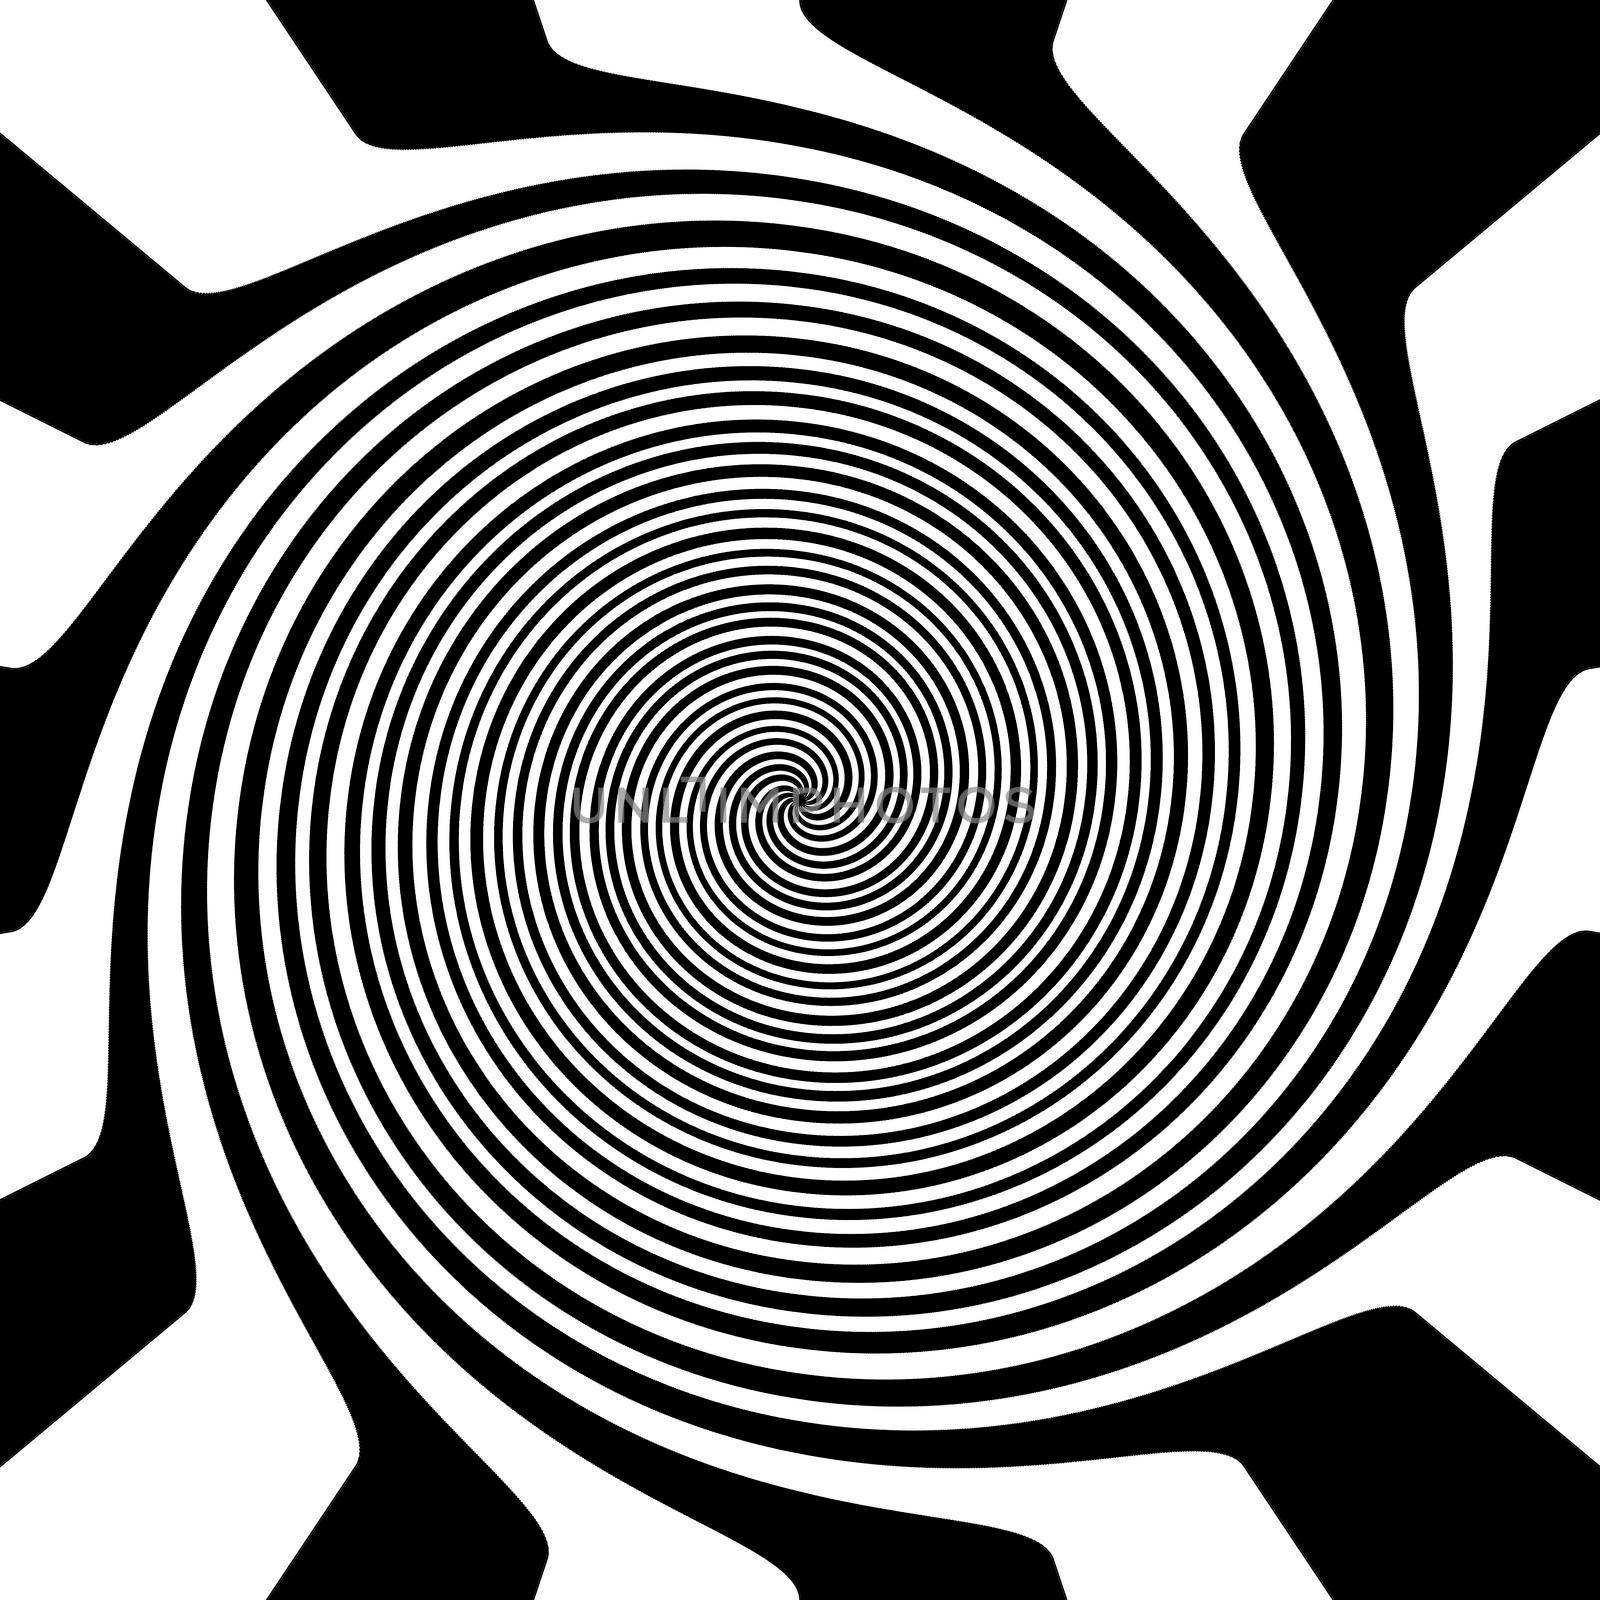 Geometric abstract pattern of concentric spiral lines by zakob337